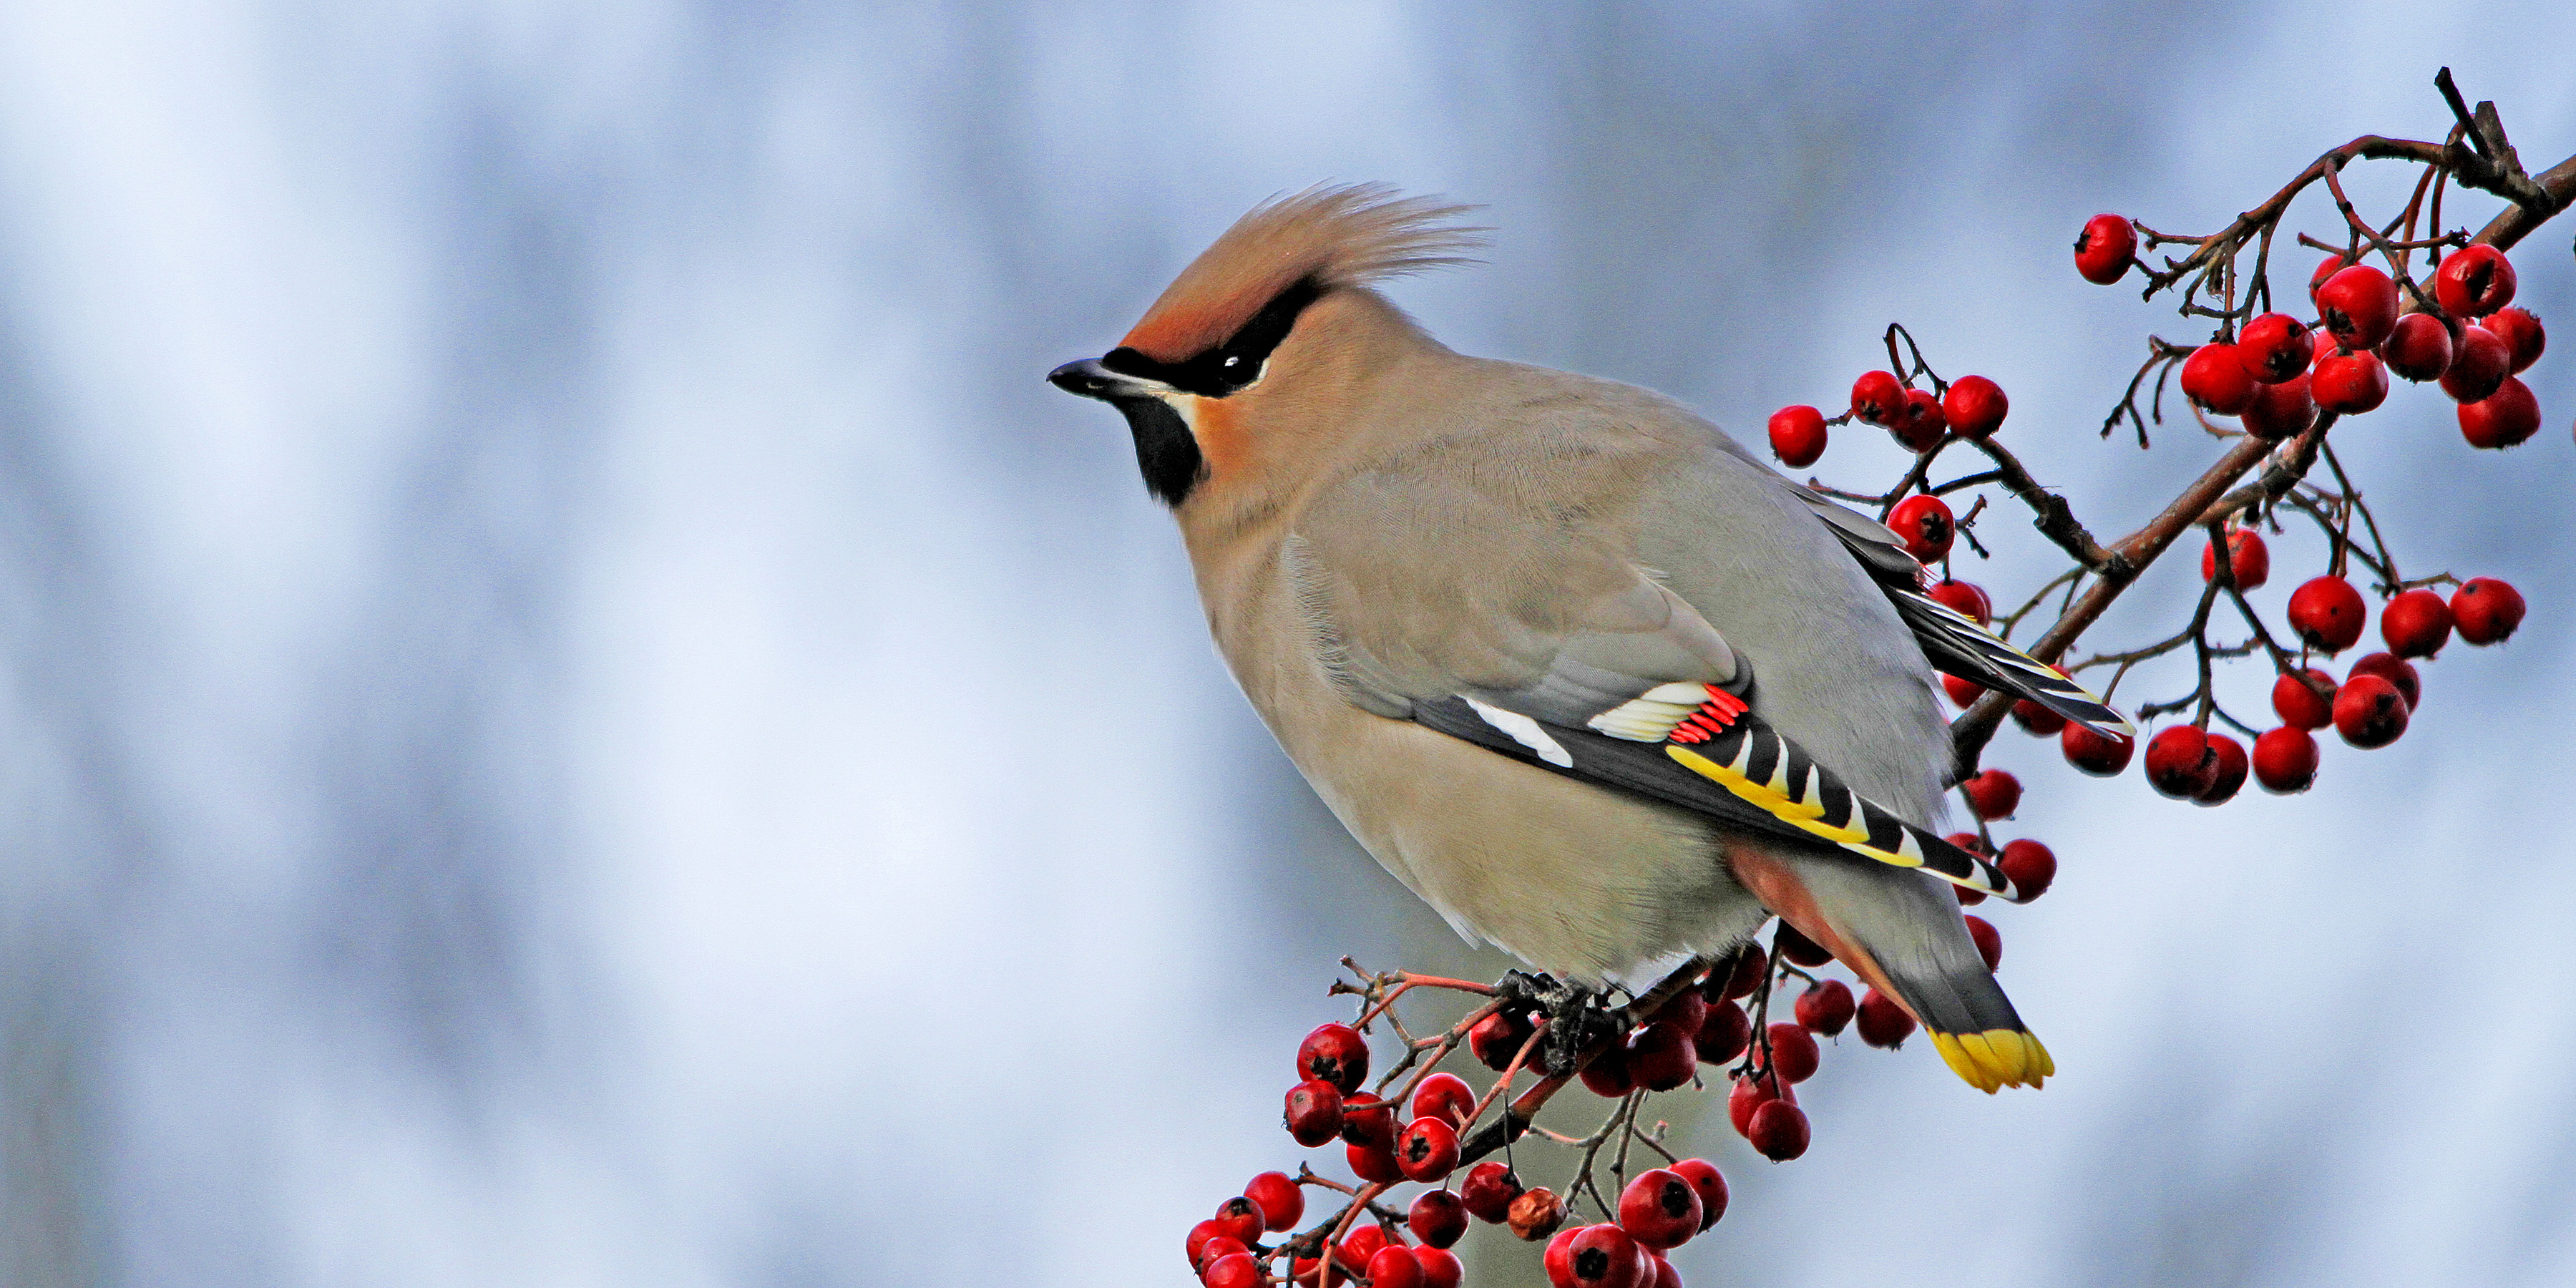 Waxwing Backgrounds, Compatible - PC, Mobile, Gadgets| 3600x1800 px